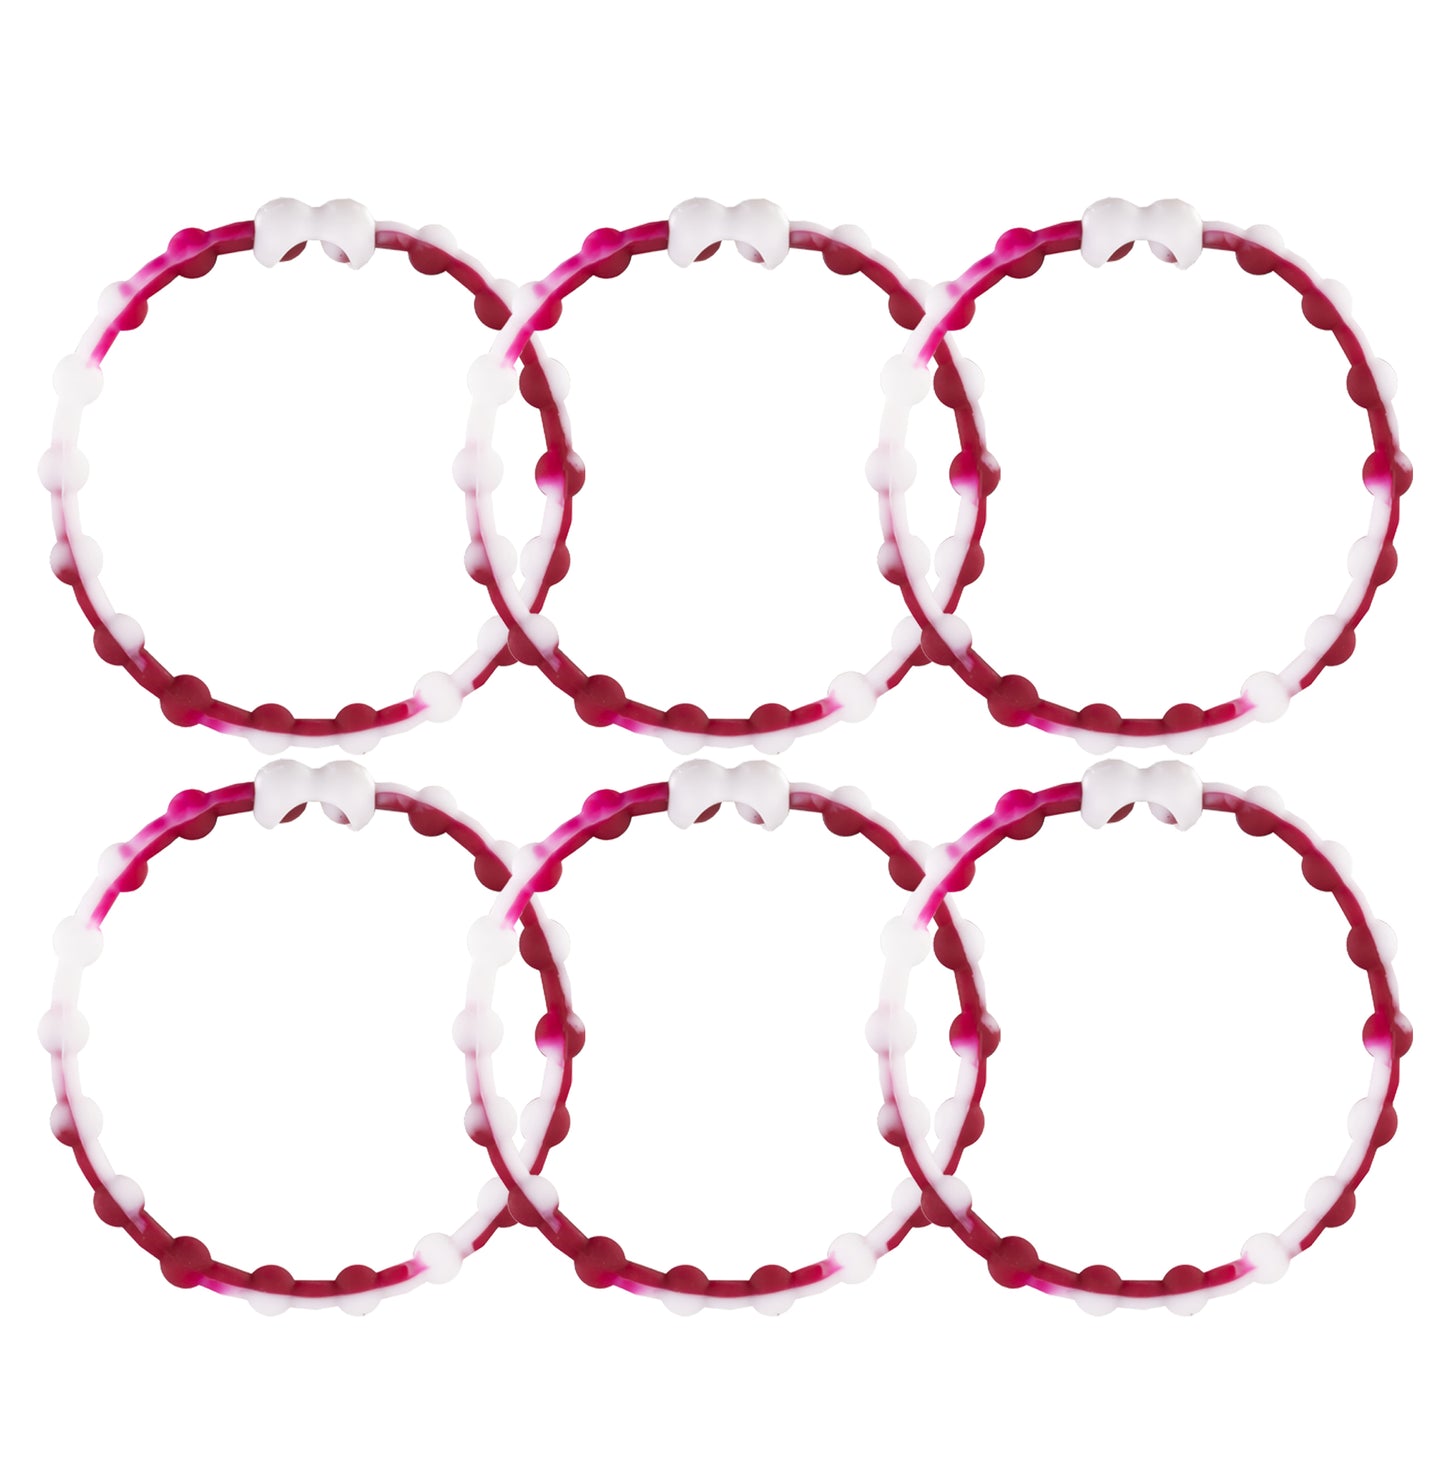 White & Maroon Hair Ties (6-Pack) - Sophisticated Style for Every Look